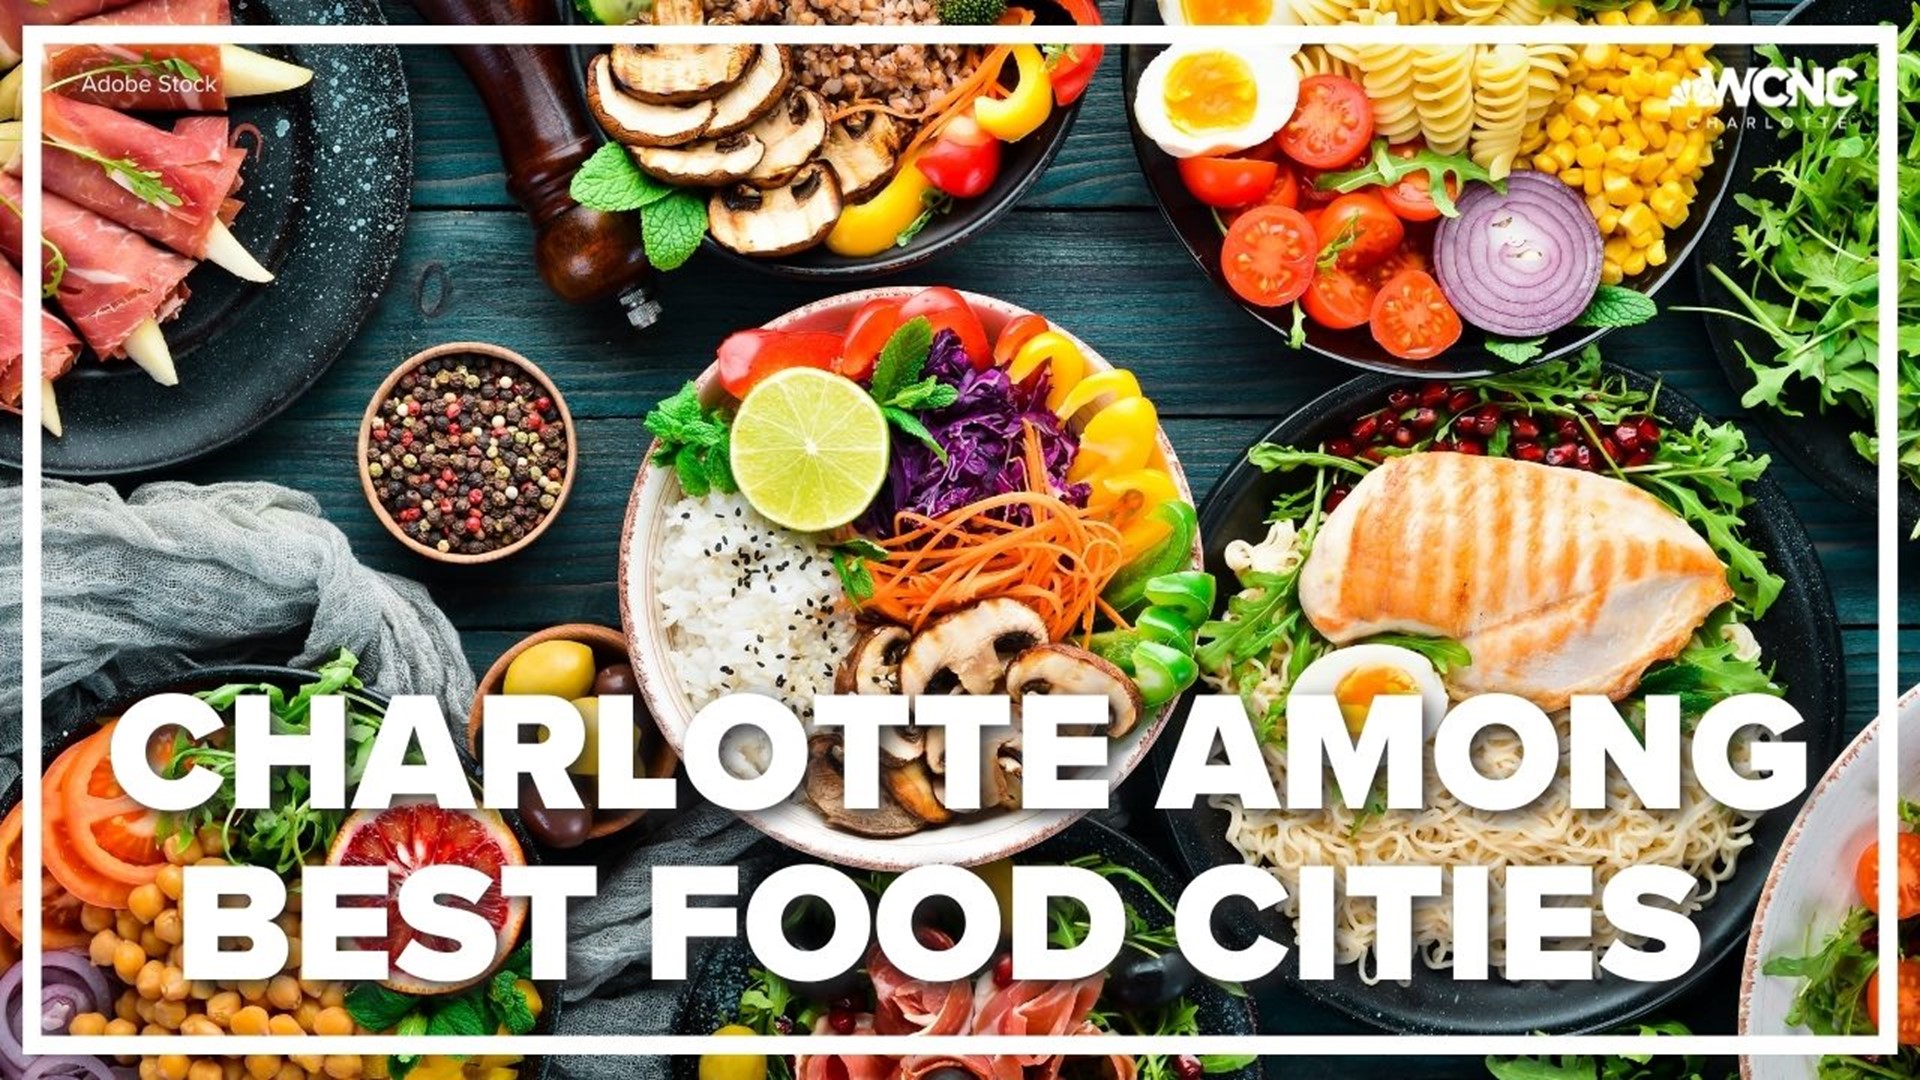 Charlotte was just named among Food and Wine magazine's 7 most exciting up and coming big cities for food.